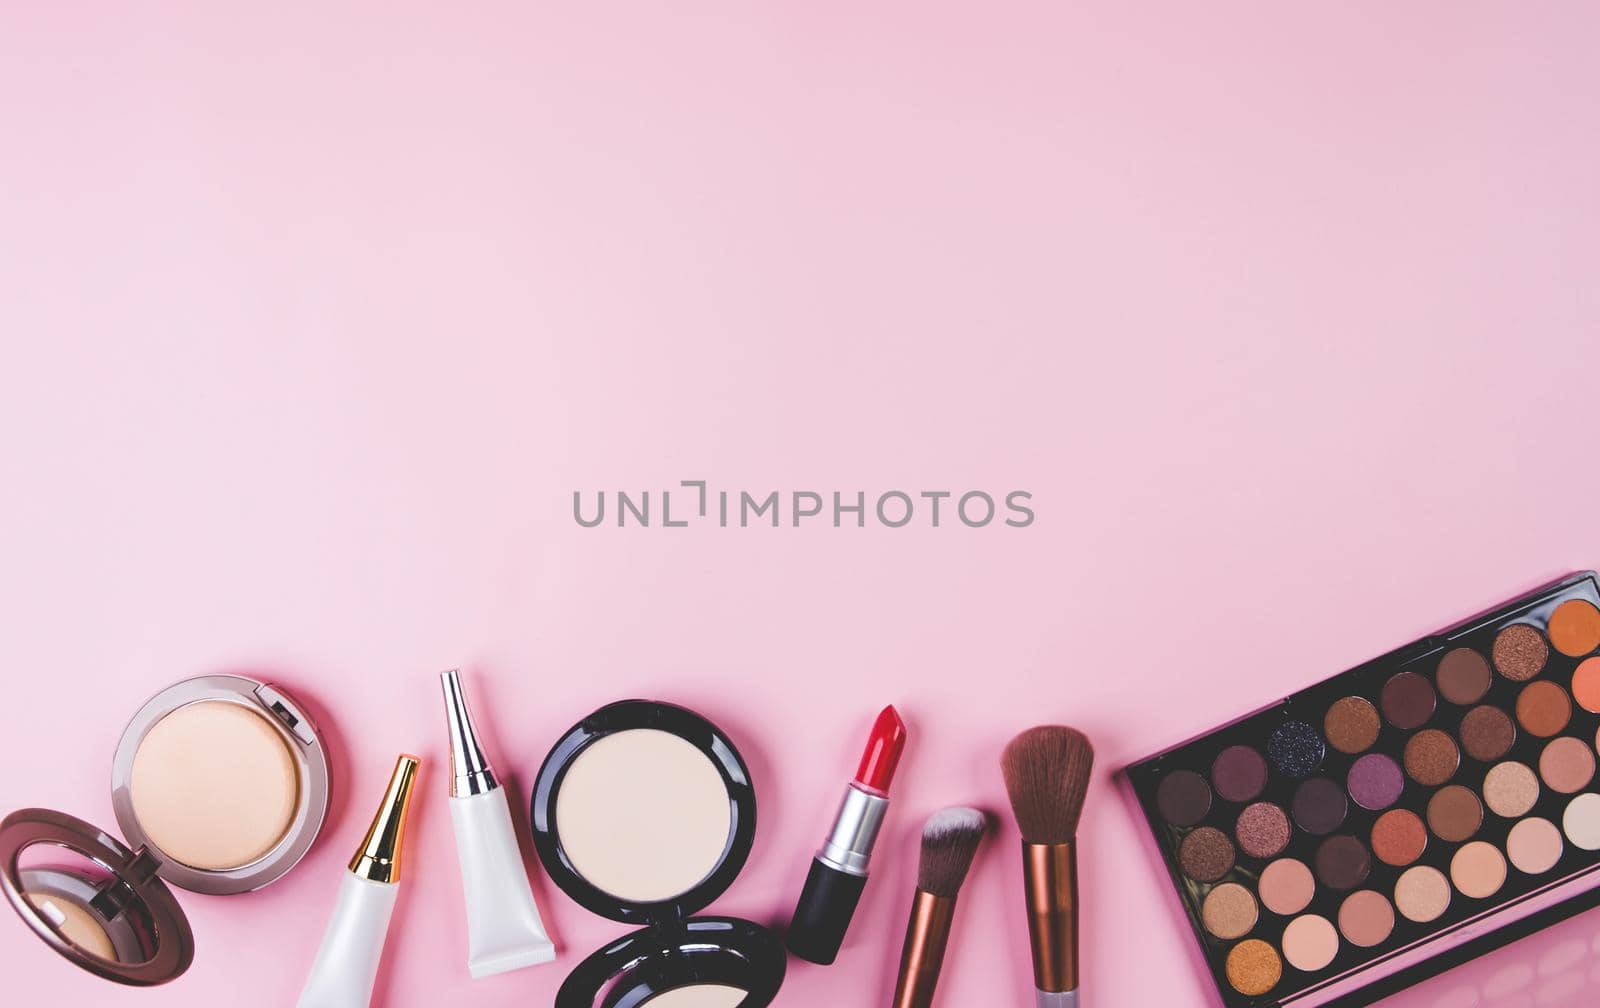 Set of cosmetic makeup tool isolated on pink background, top view, flat lay, brush and lipstick and makeup palette kit, no people, nobody, copy space, group object about beauty, collection make-up.